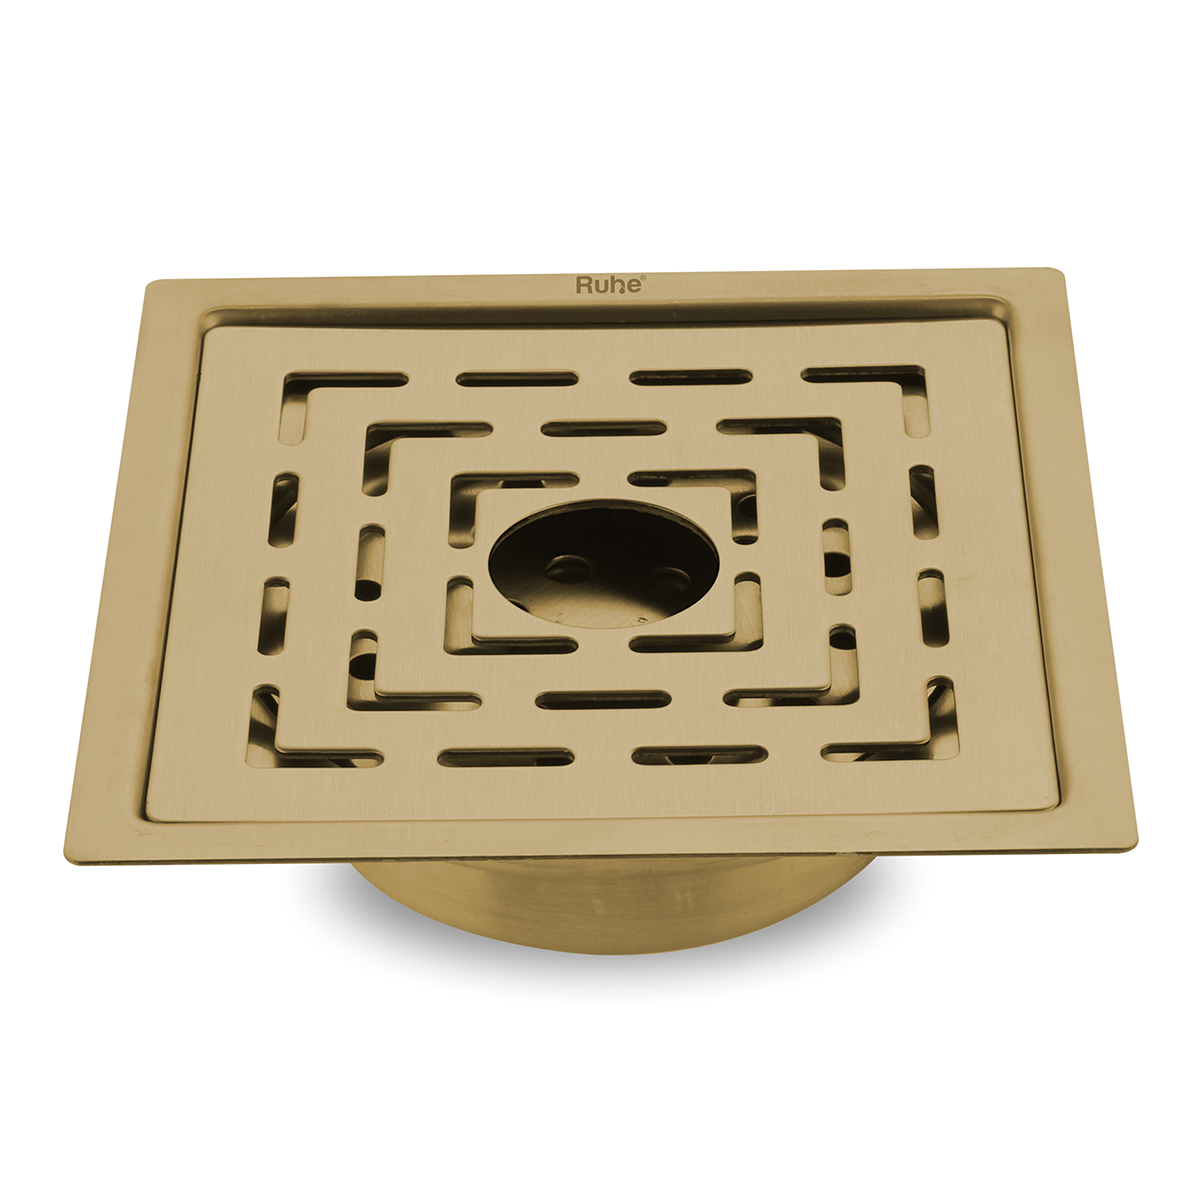 Sapphire Square Flat Cut Floor Drain in Yellow Gold PVD Coating (6 x 6 Inches) with Hole